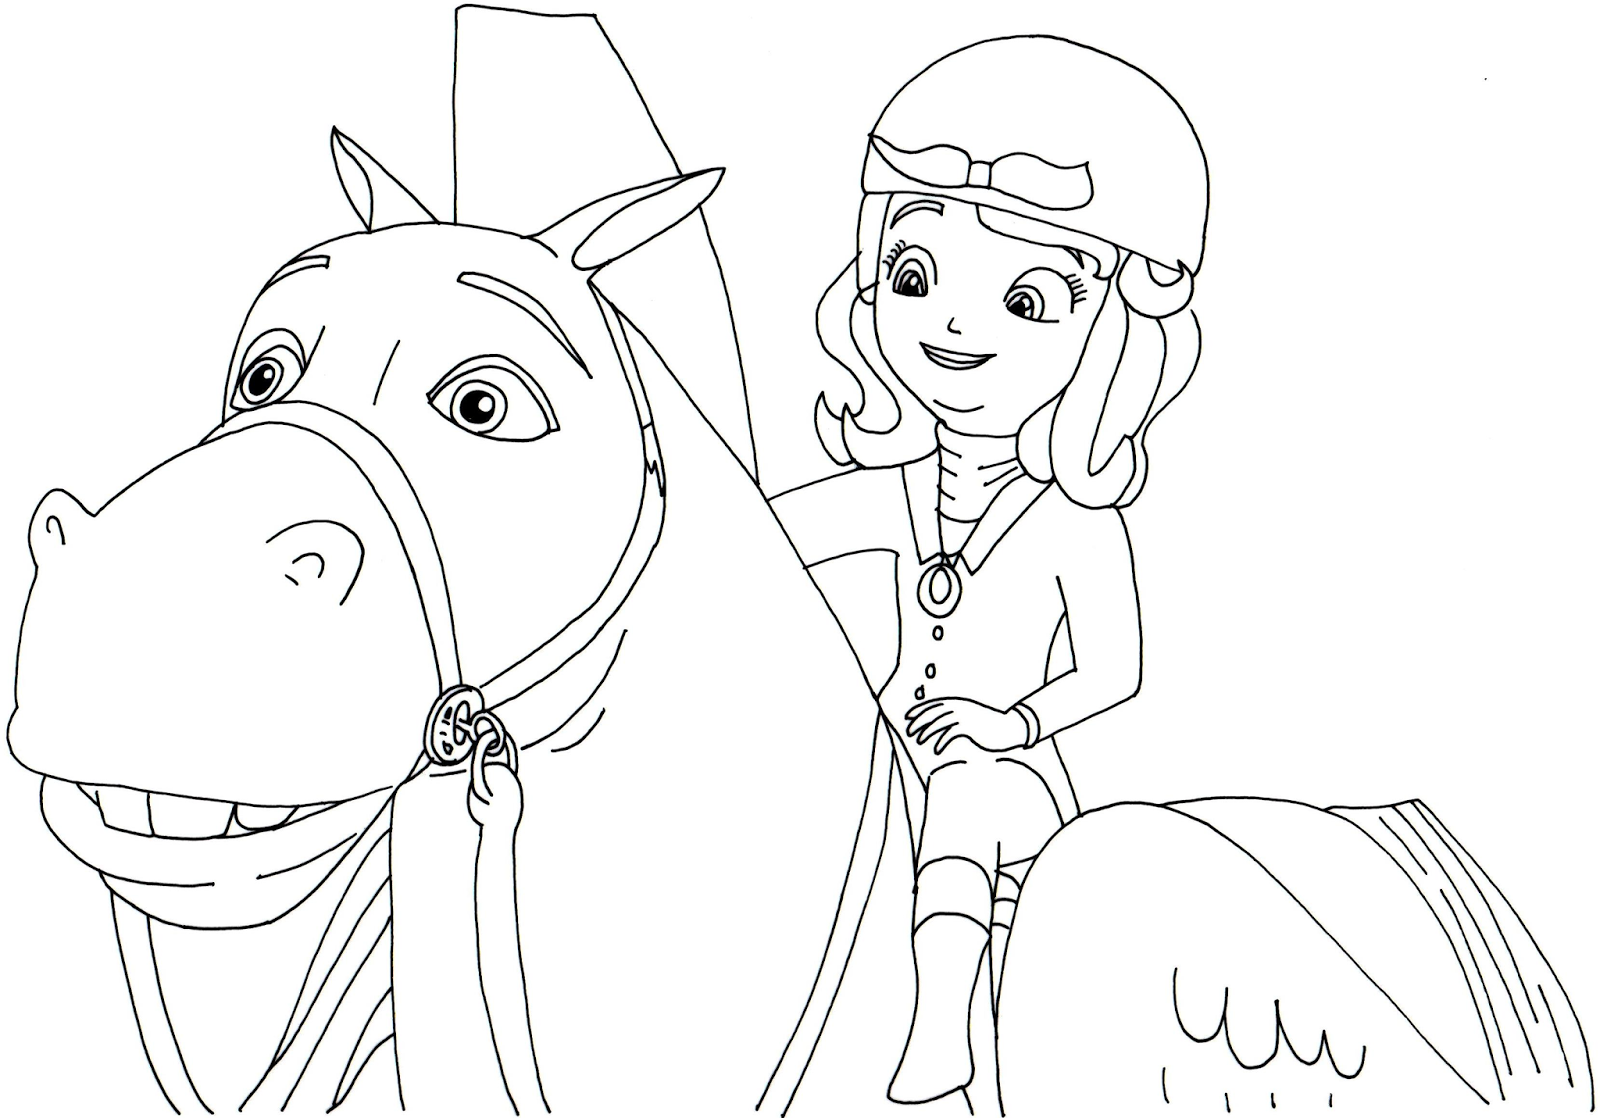 sofia-the-first-printable-coloring-pages-at-getdrawings-free-download